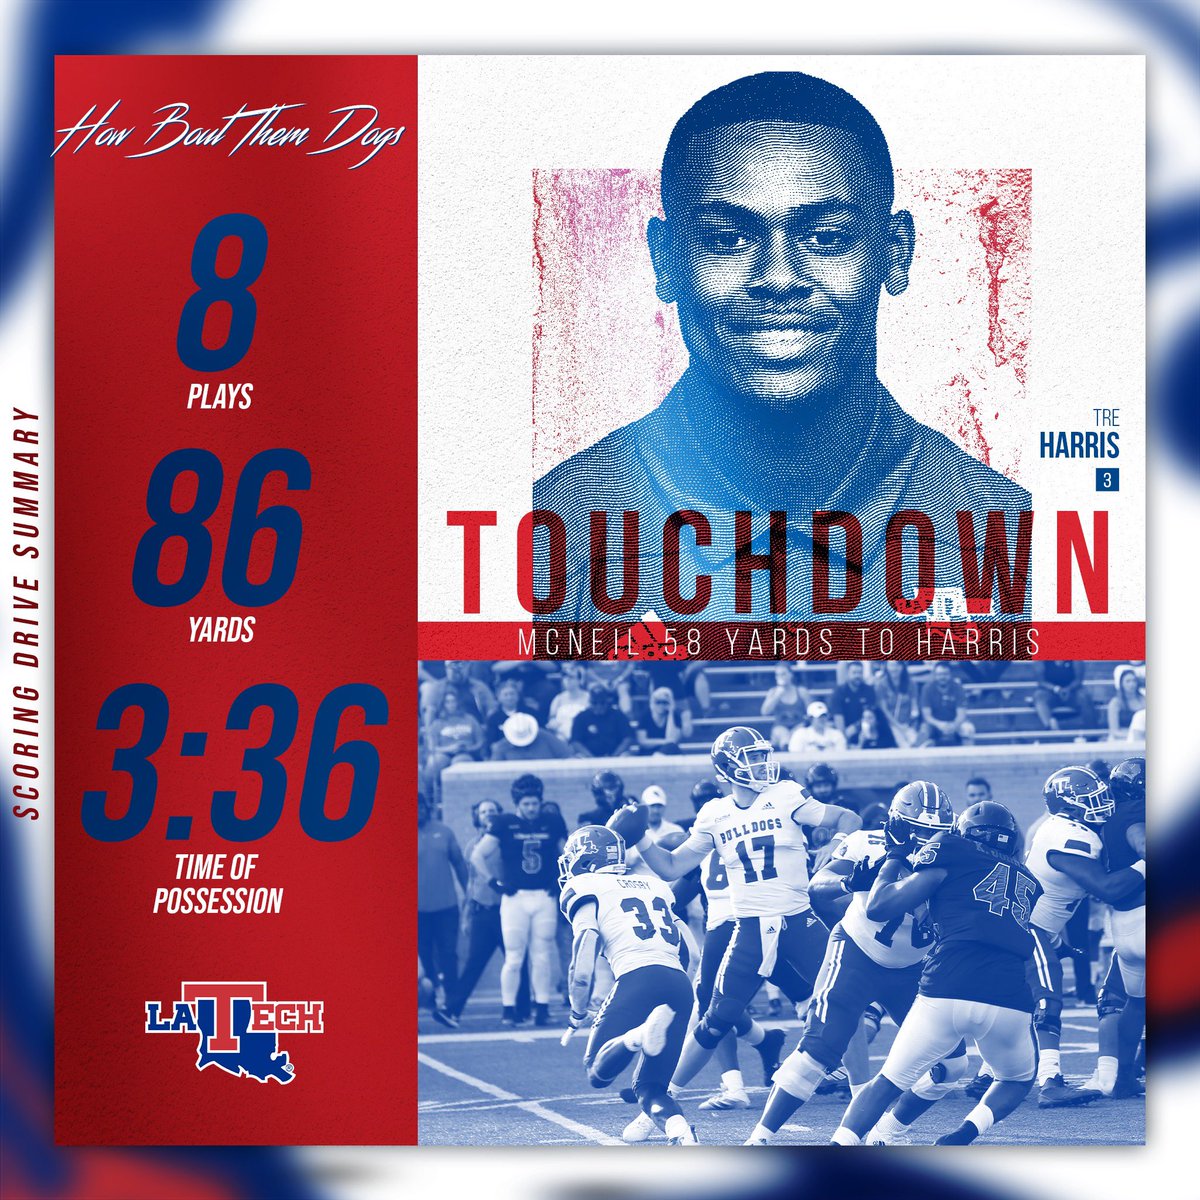 Rolling the dice and coming up big! #EverLoyalBe